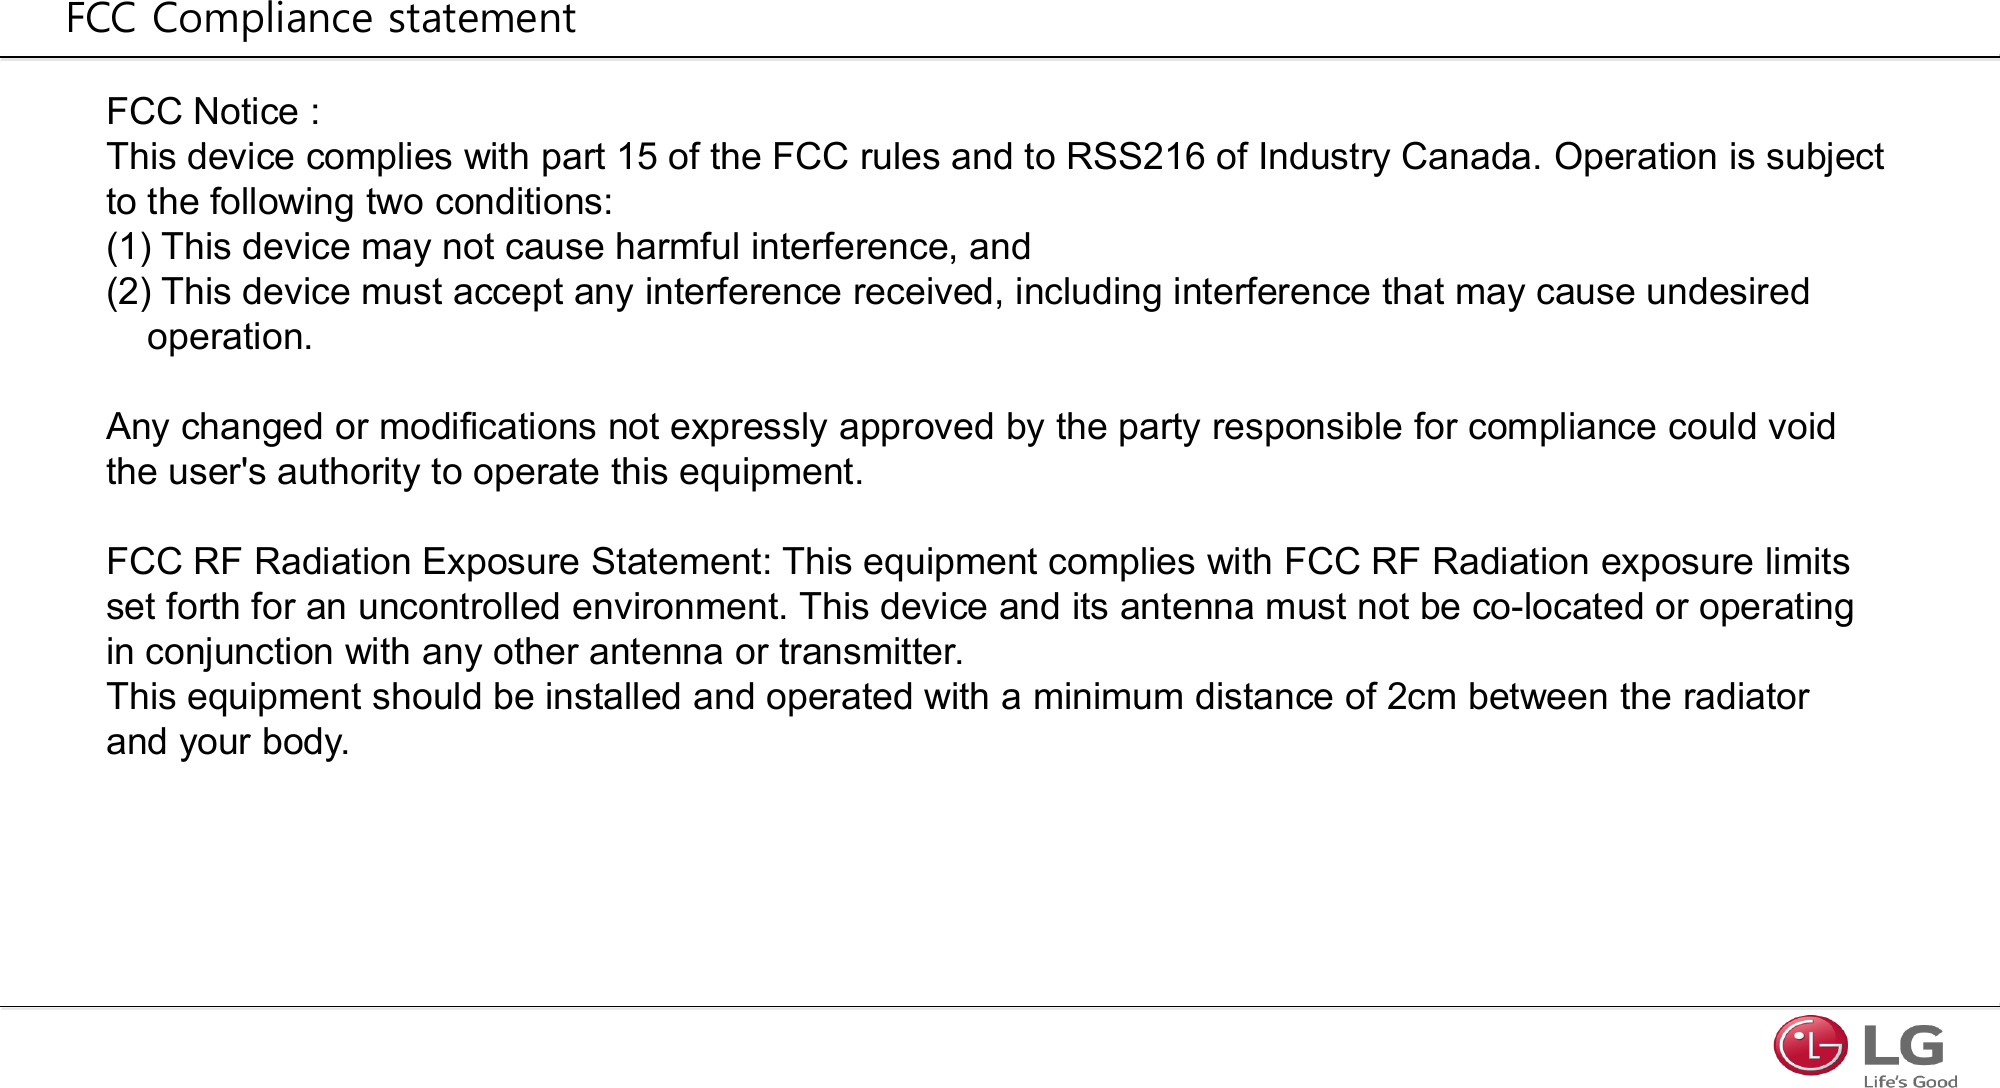 FCC Notice : This device complies with part 15 of the FCC rules and to RSS216 of Industry Canada. Operation is subject to the following two conditions:(1) This device may not cause harmful interference, and(2) This device must accept any interference received, including interference that may cause undesired operation.Any changed or modifications not expressly approved by the party responsible for compliance could void the user&apos;s authority to operate this equipment.FCC RF Radiation Exposure Statement: This equipment complies with FCC RF Radiation exposure limits set forth for an uncontrolled environment. This device and its antenna must not be co-located or operating in conjunction with any other antenna or transmitter.This equipment should be installed and operated with a minimum distance of 2cm between the radiator and your body.FCC Compliance statement